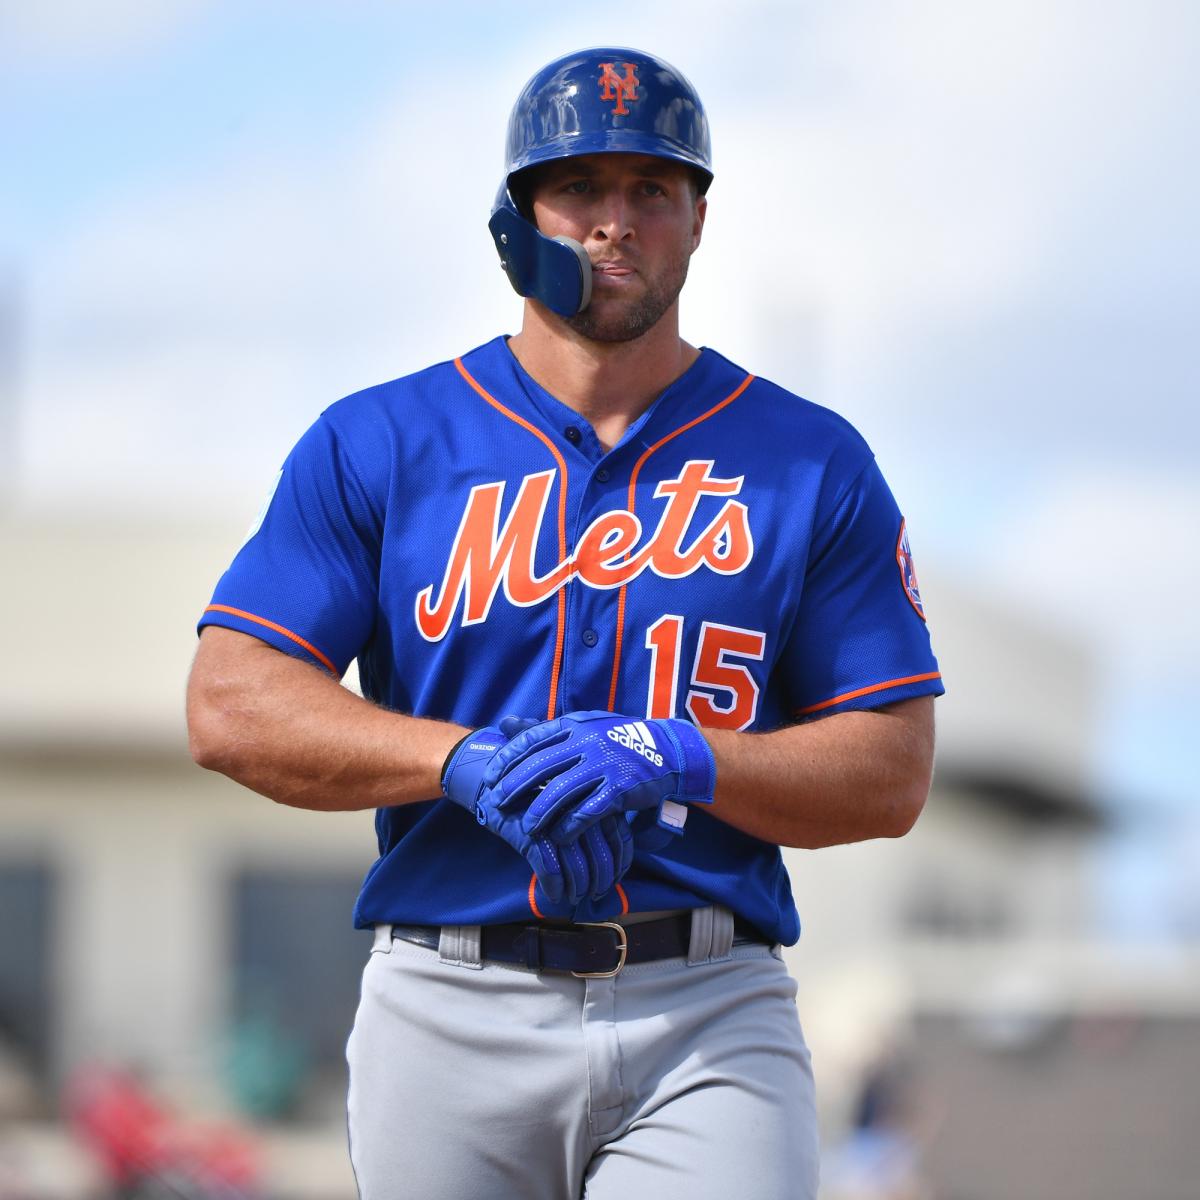 As Planned, Tim Tebow Joins Mets' Camp - The New York Times